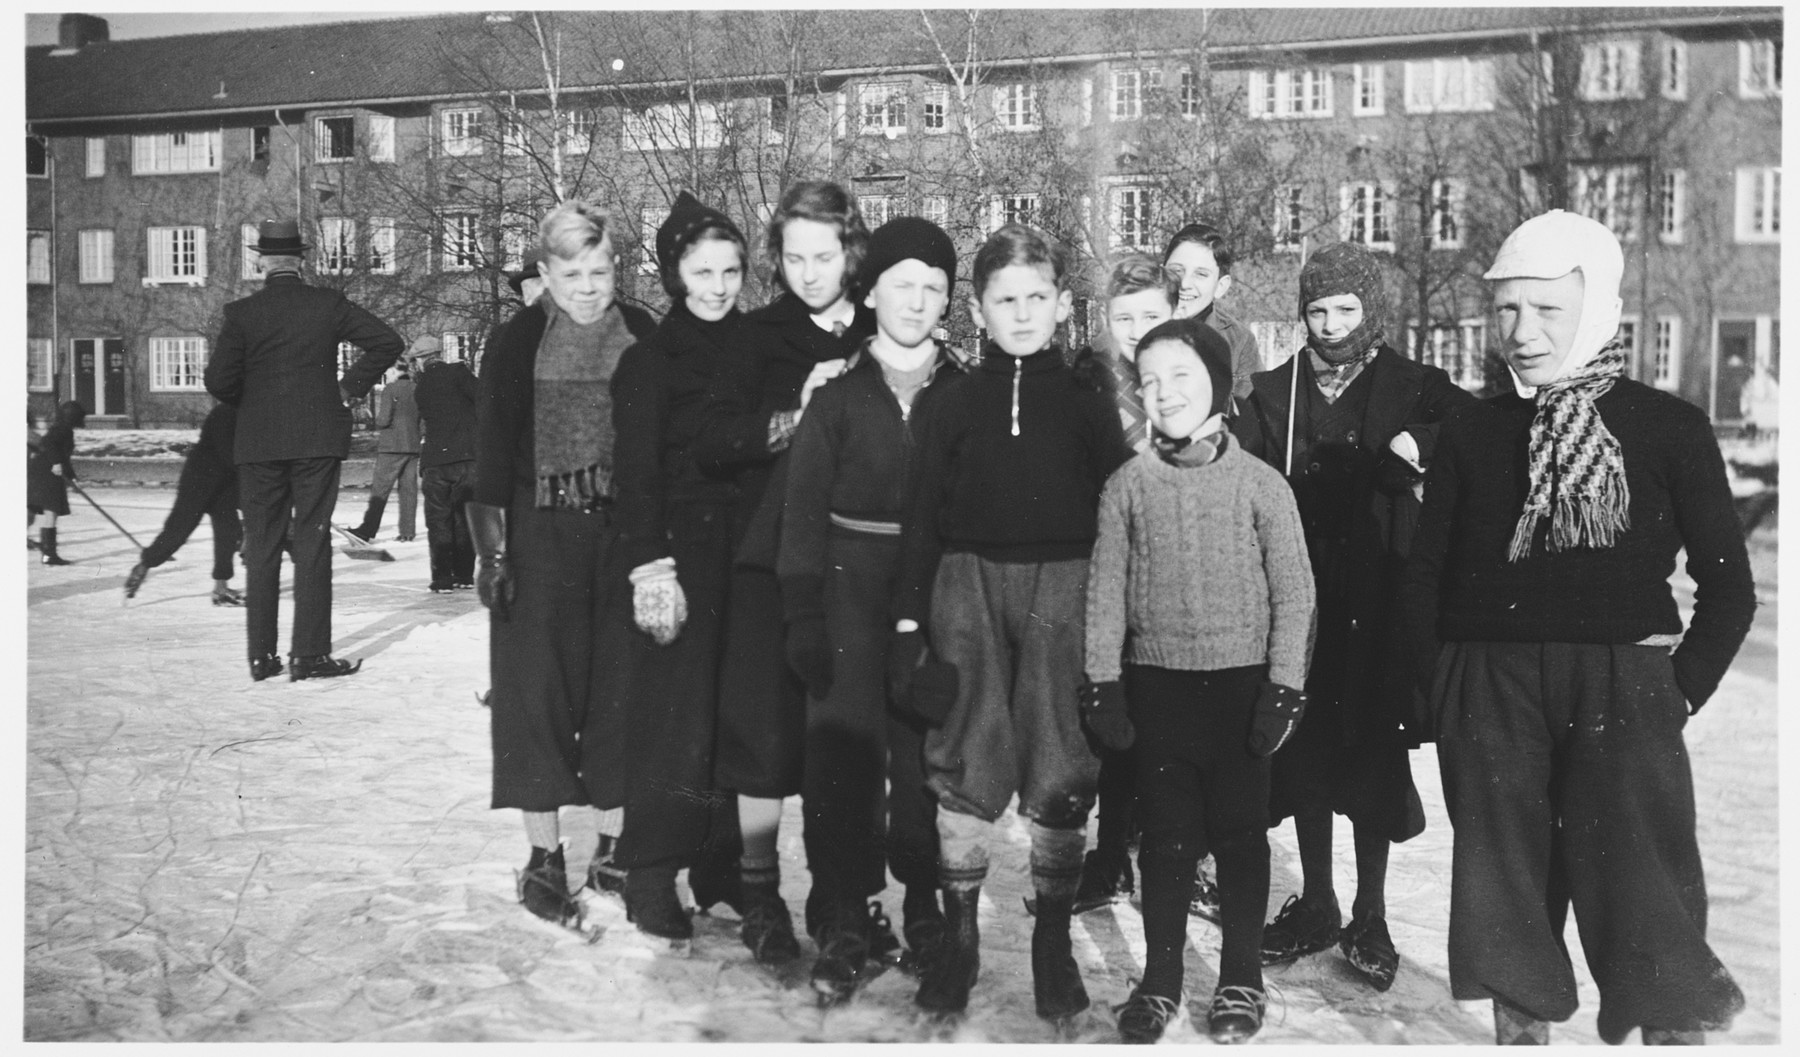 Group portrait of school children on an ice skating rink in Amsterdam.

In the background children involved in a game of curling.